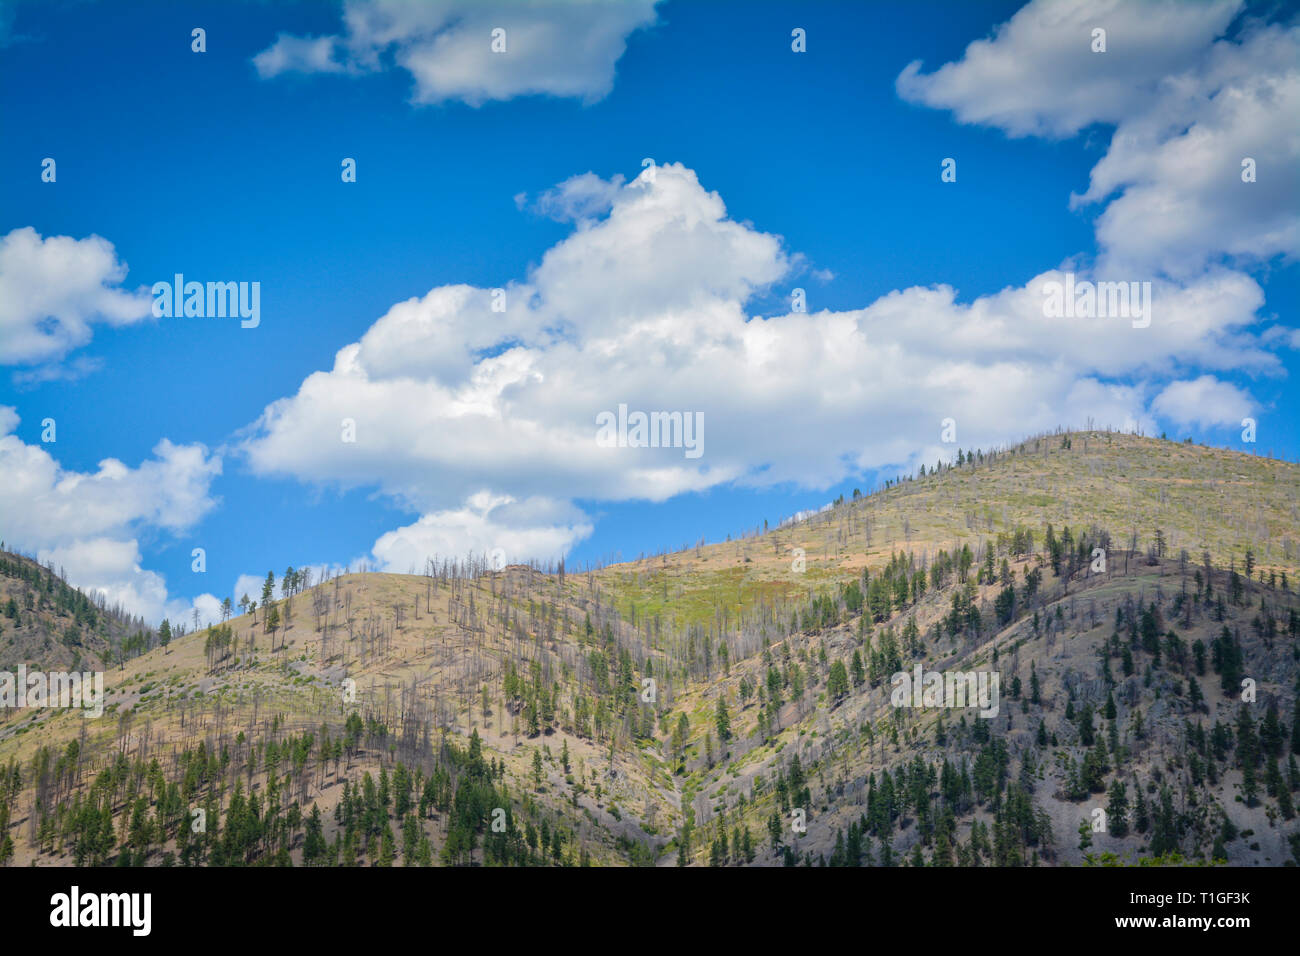 A big sky country view of blue sky with puffy white clouds on a mountaintop in western Montana, USA Stock Photo